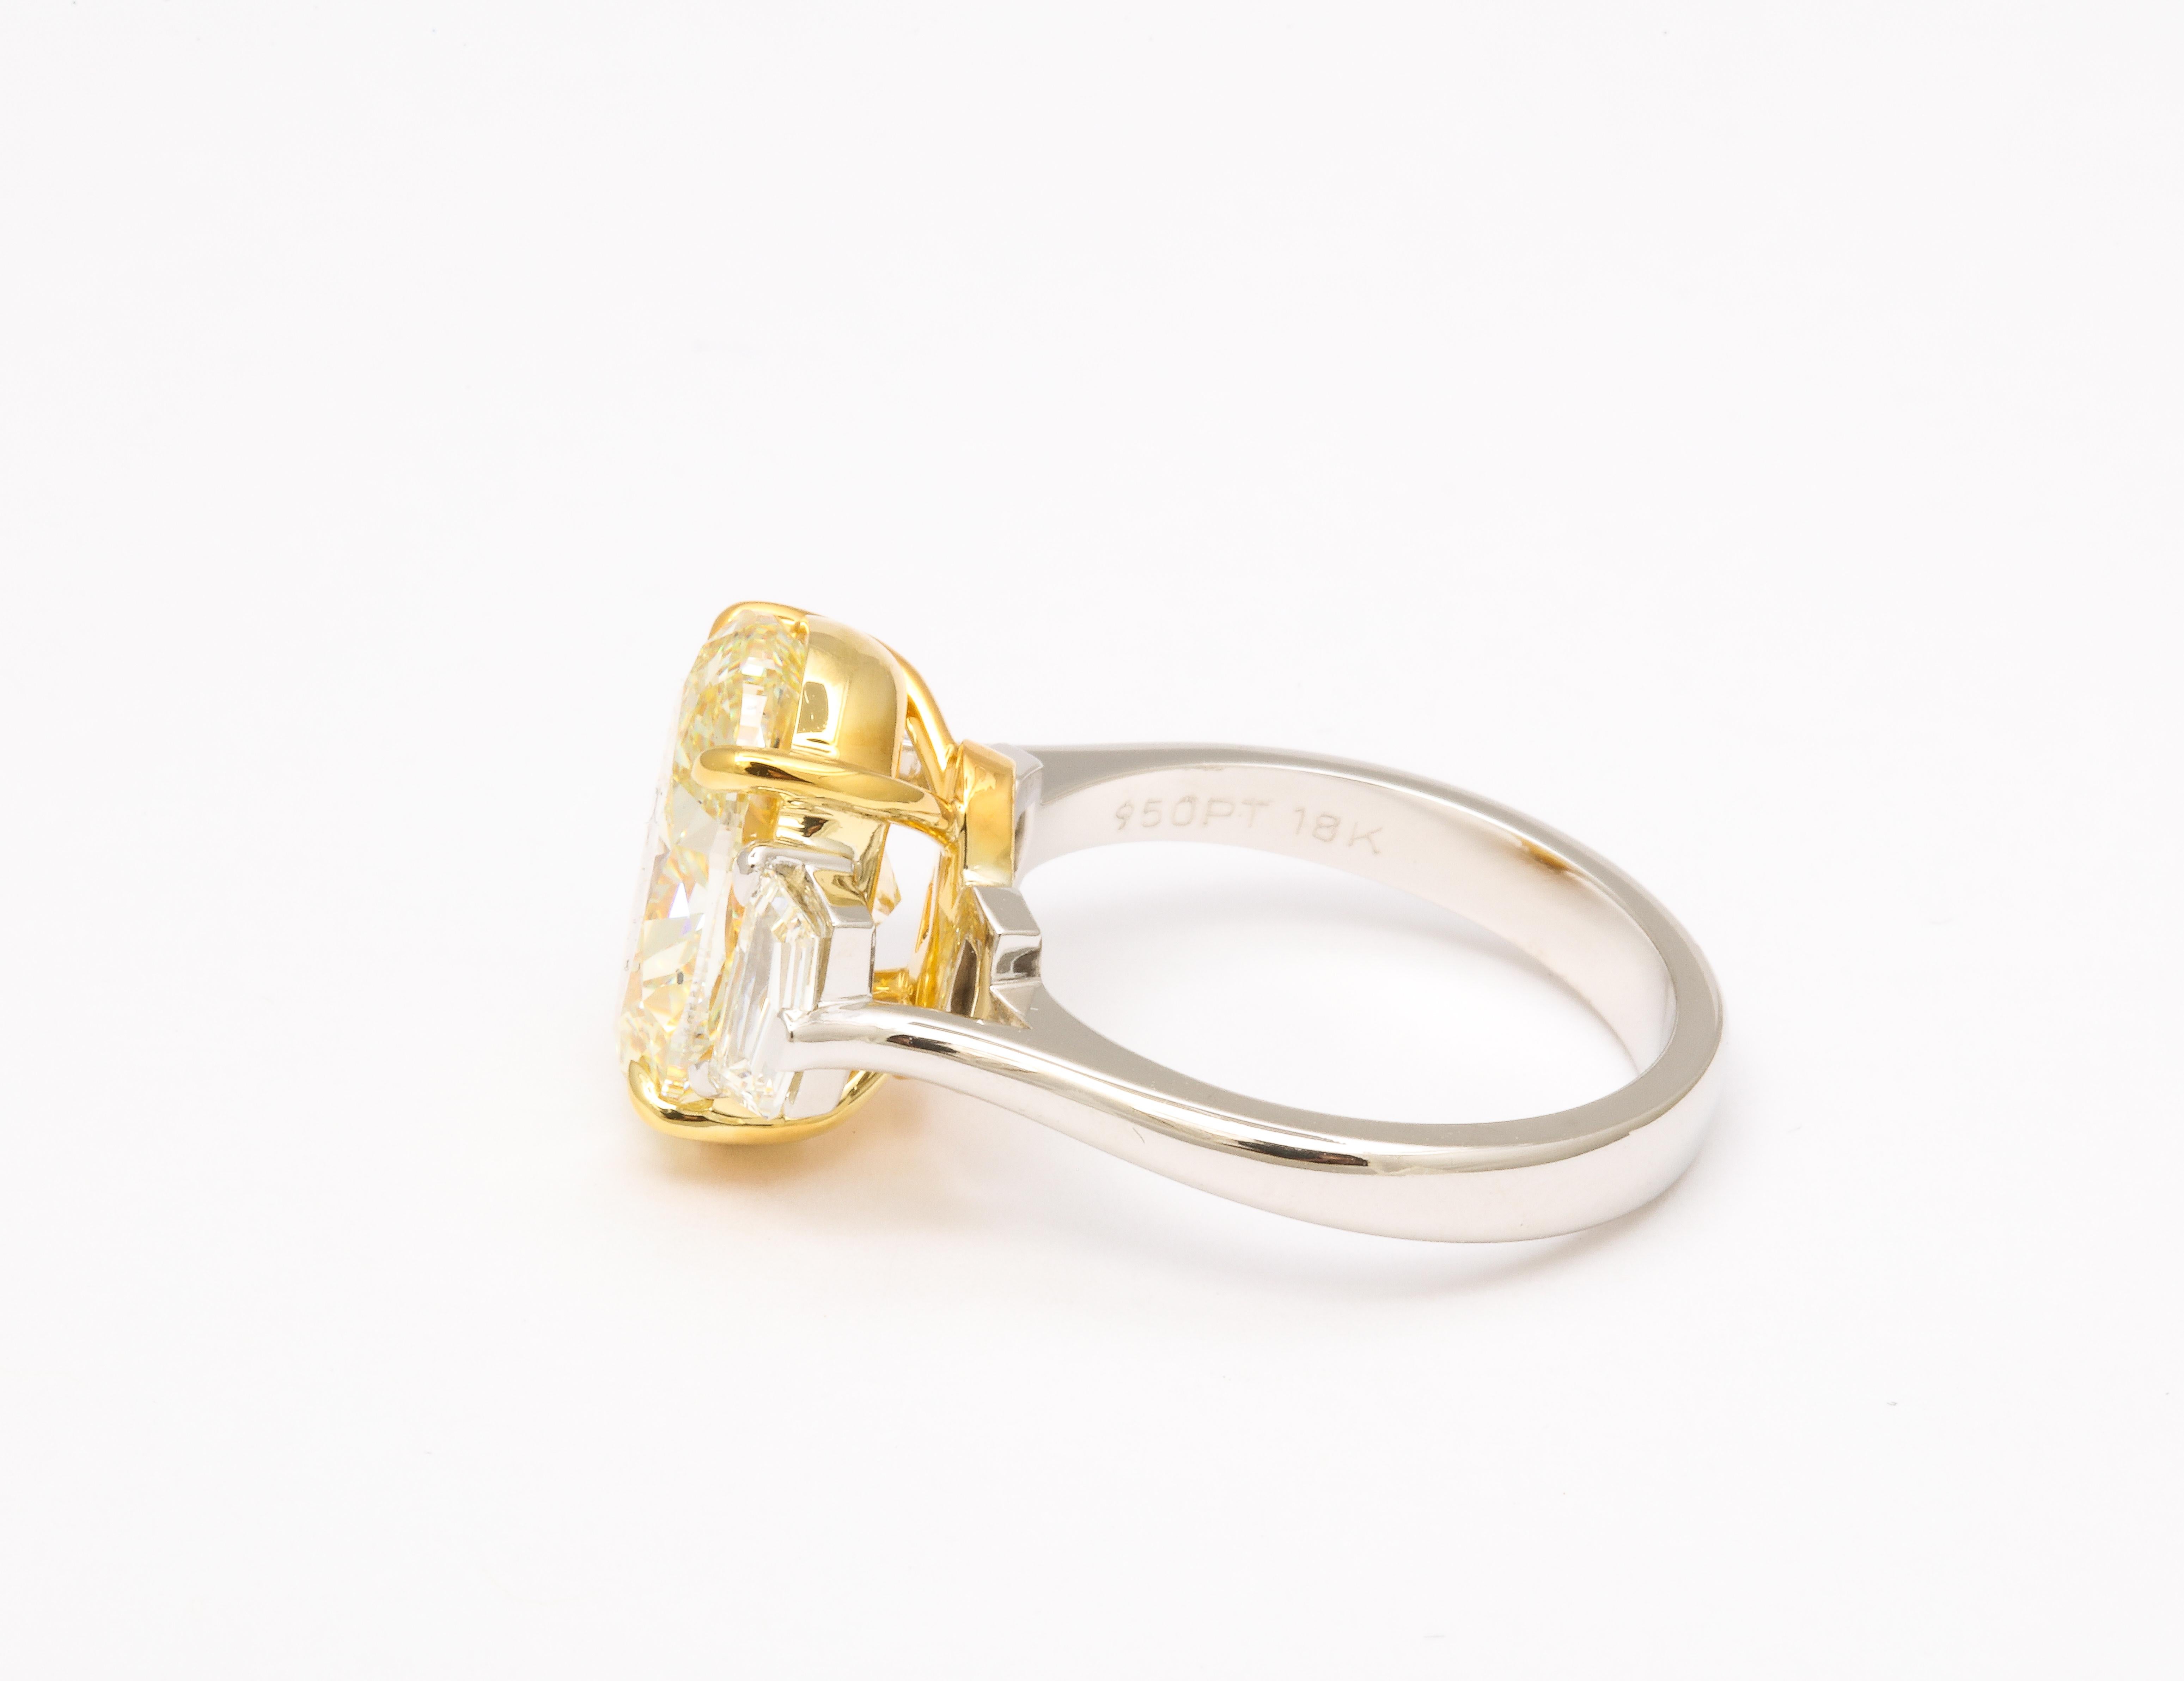 6 Carat Oval Yellow Diamond Ring Gia Certified For Sale 1